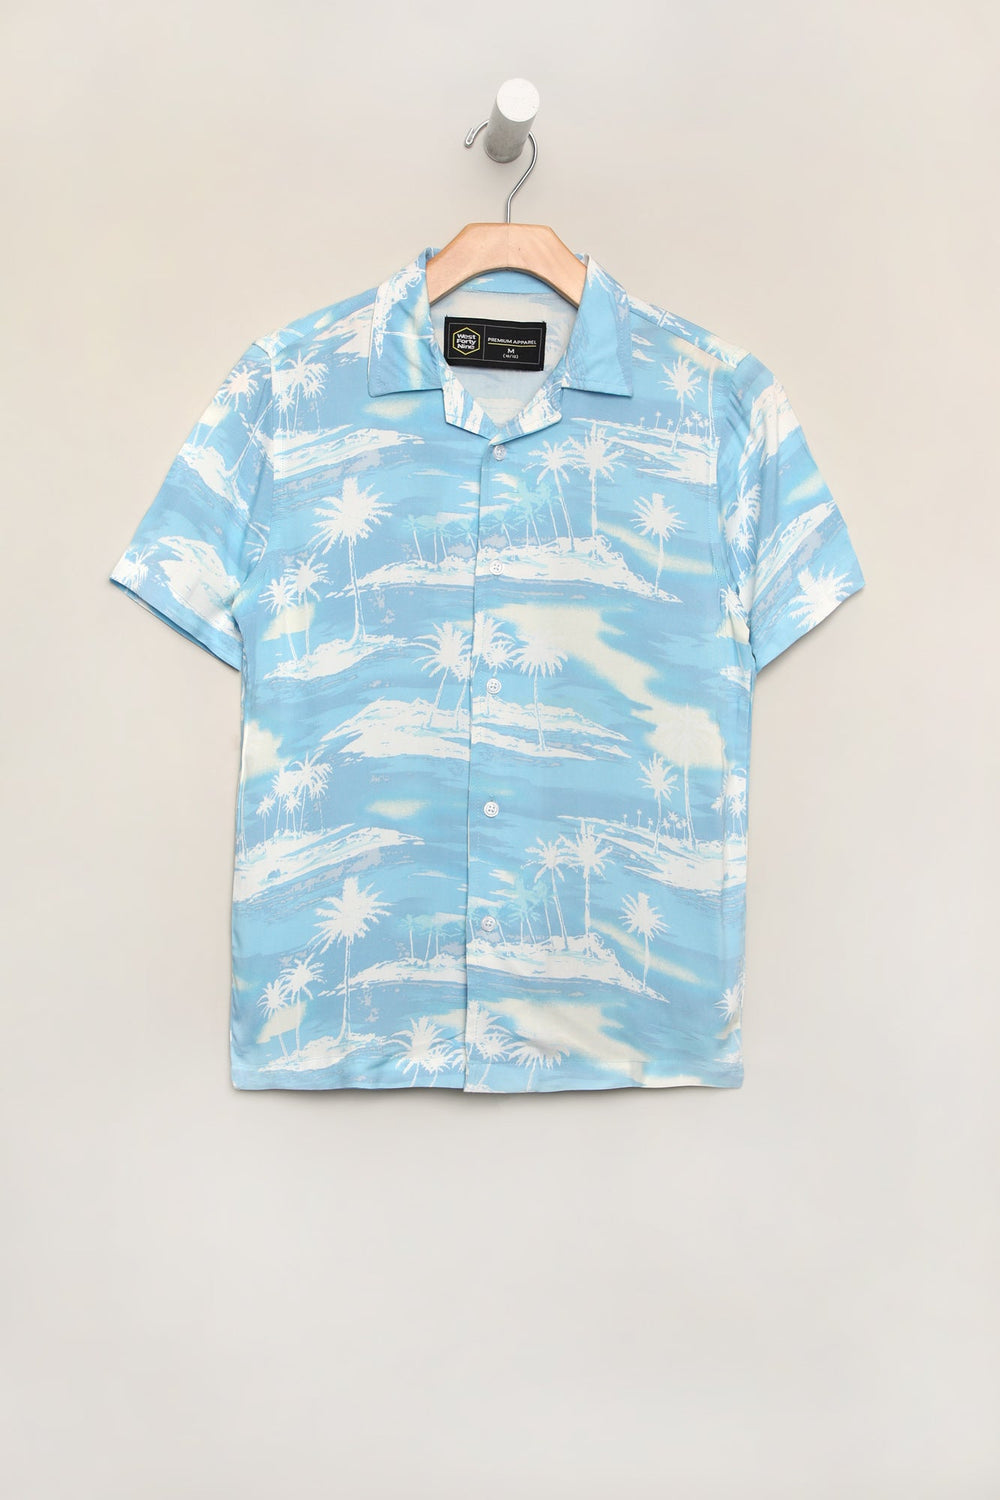 West49 Youth Tropical Print Rayon Button-Up West49 Youth Tropical Print Rayon Button-Up